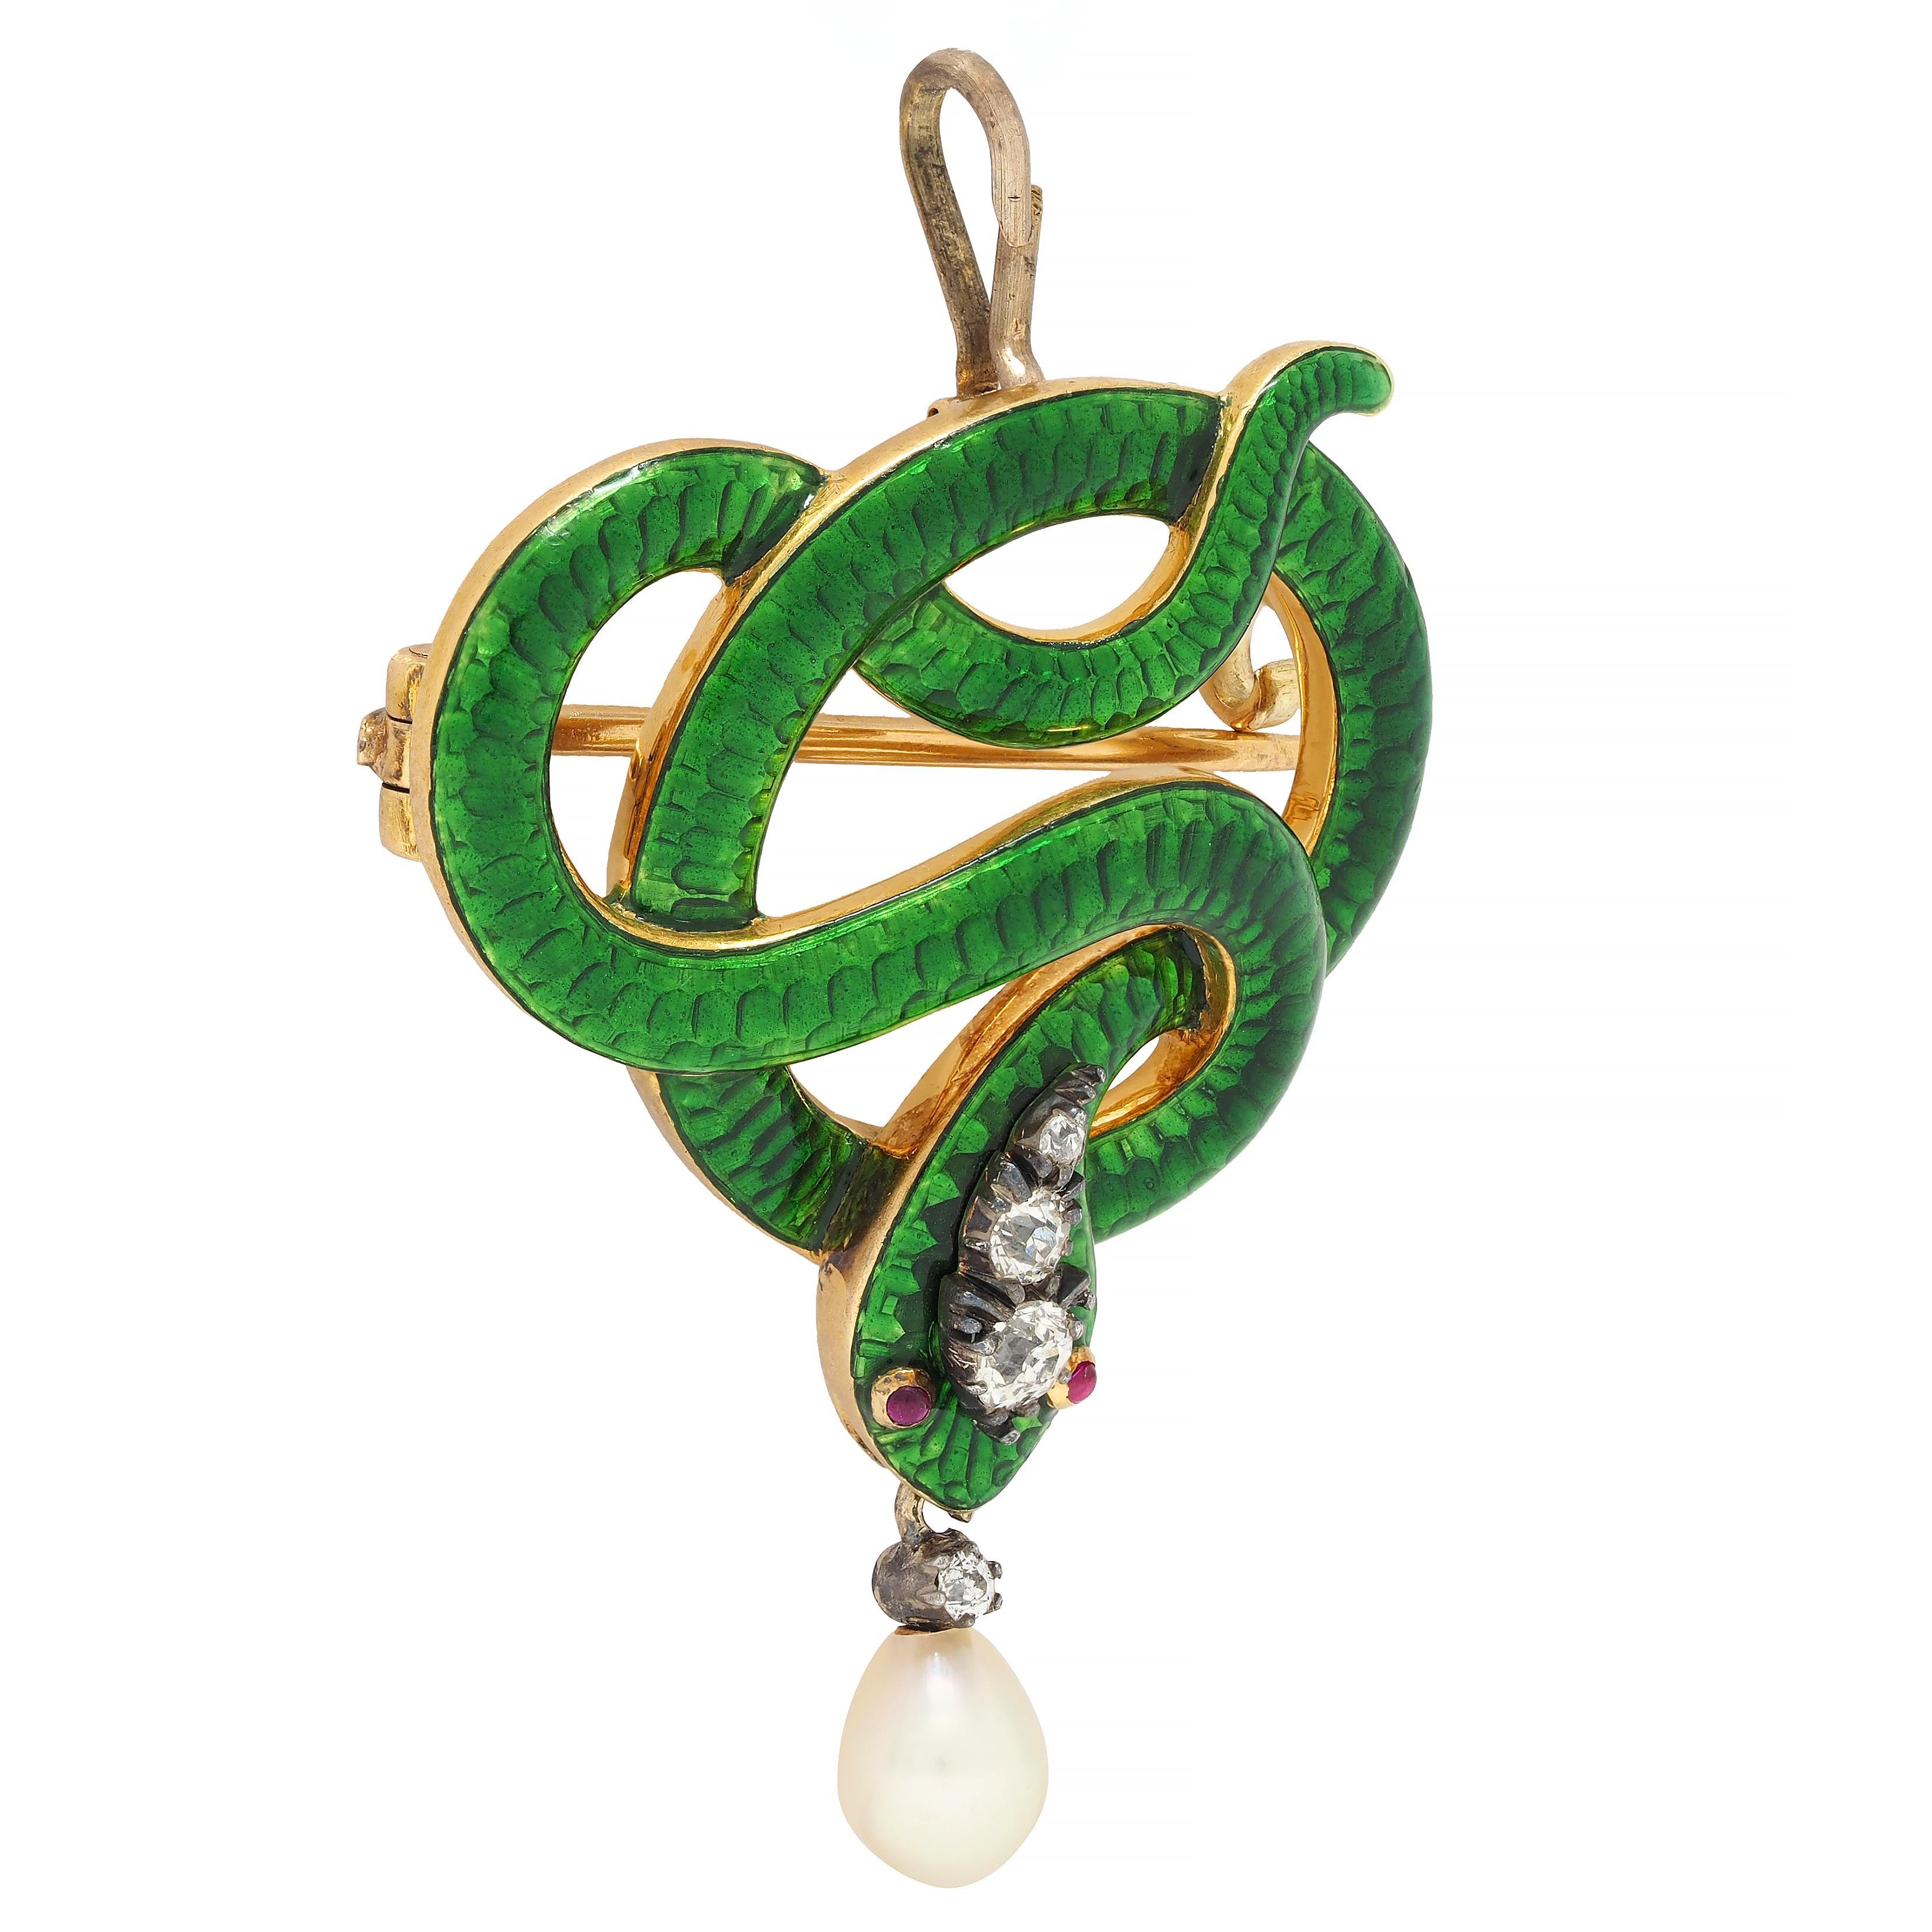 Designed as a stylized swirling snake with basse-taille enamel body
Transparent medium green and glossed over engraved scale motif 
Featuring four old European cut diamonds in head and drop
Weighing approximately 0.15 carat total - eye clean and